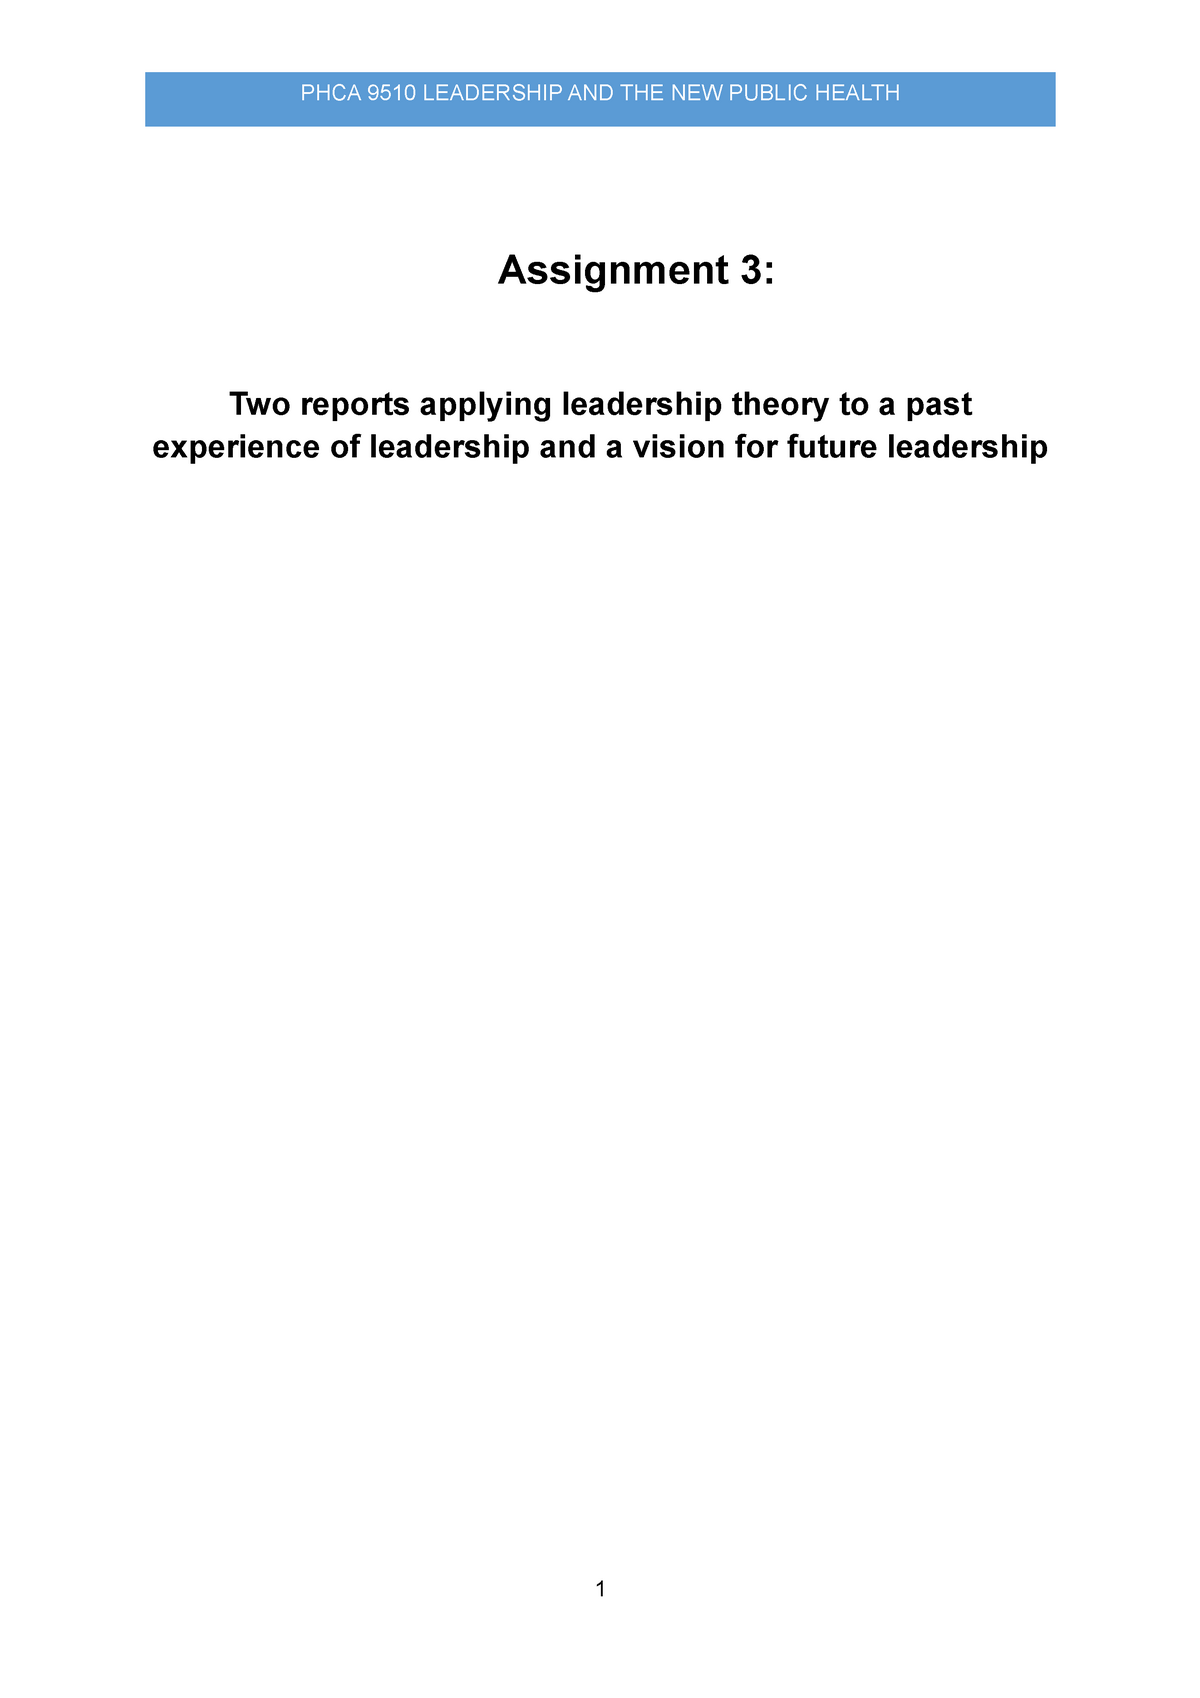 leadership assignment 3